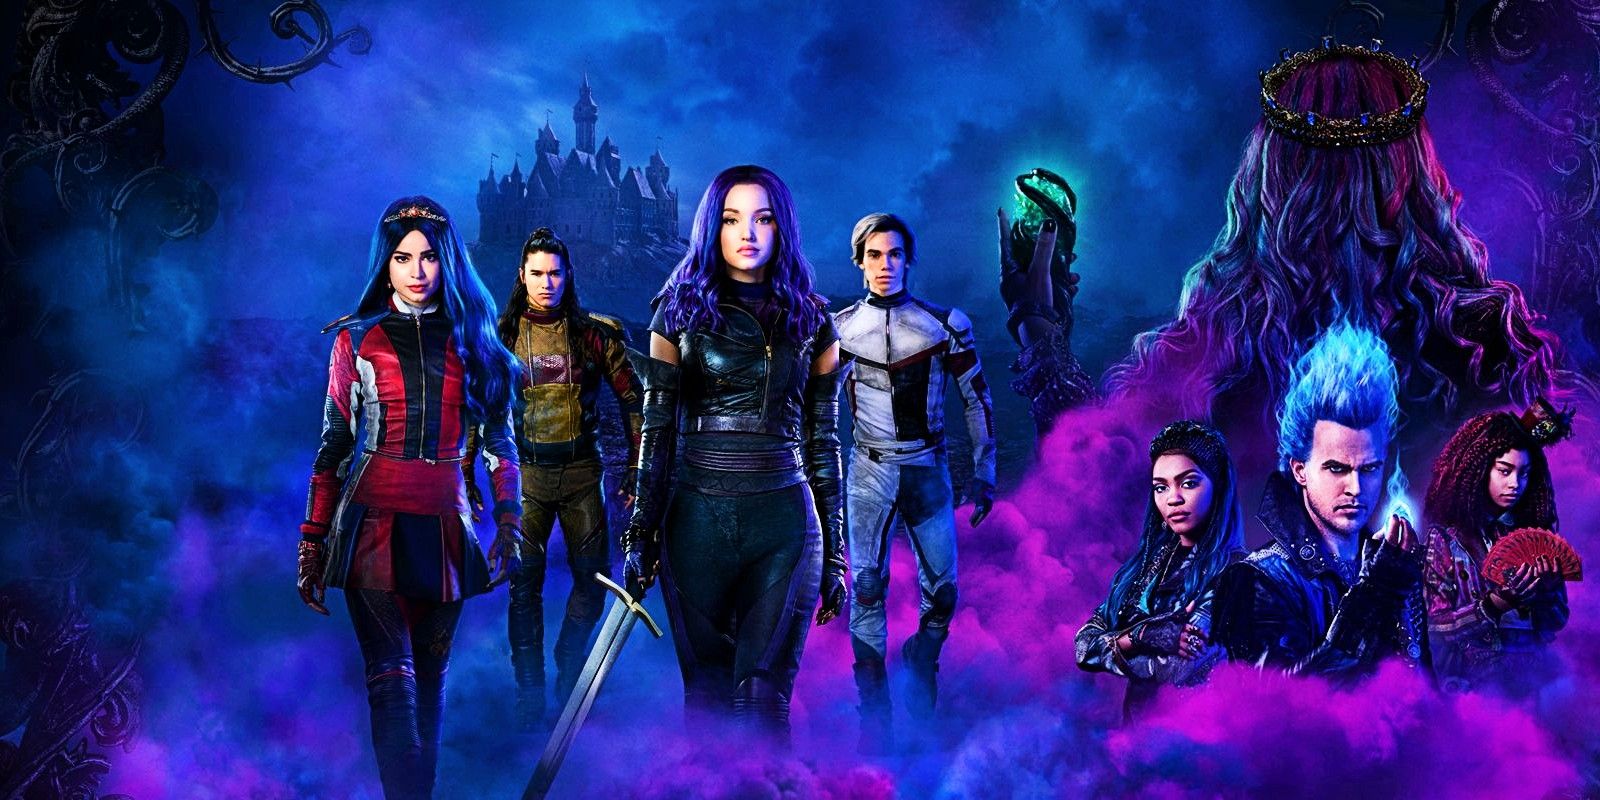 Disney Descendants 3 Movie Poster with Evie, Jay, Mal, Carlos, Uma, and Hades in front of a purple background.